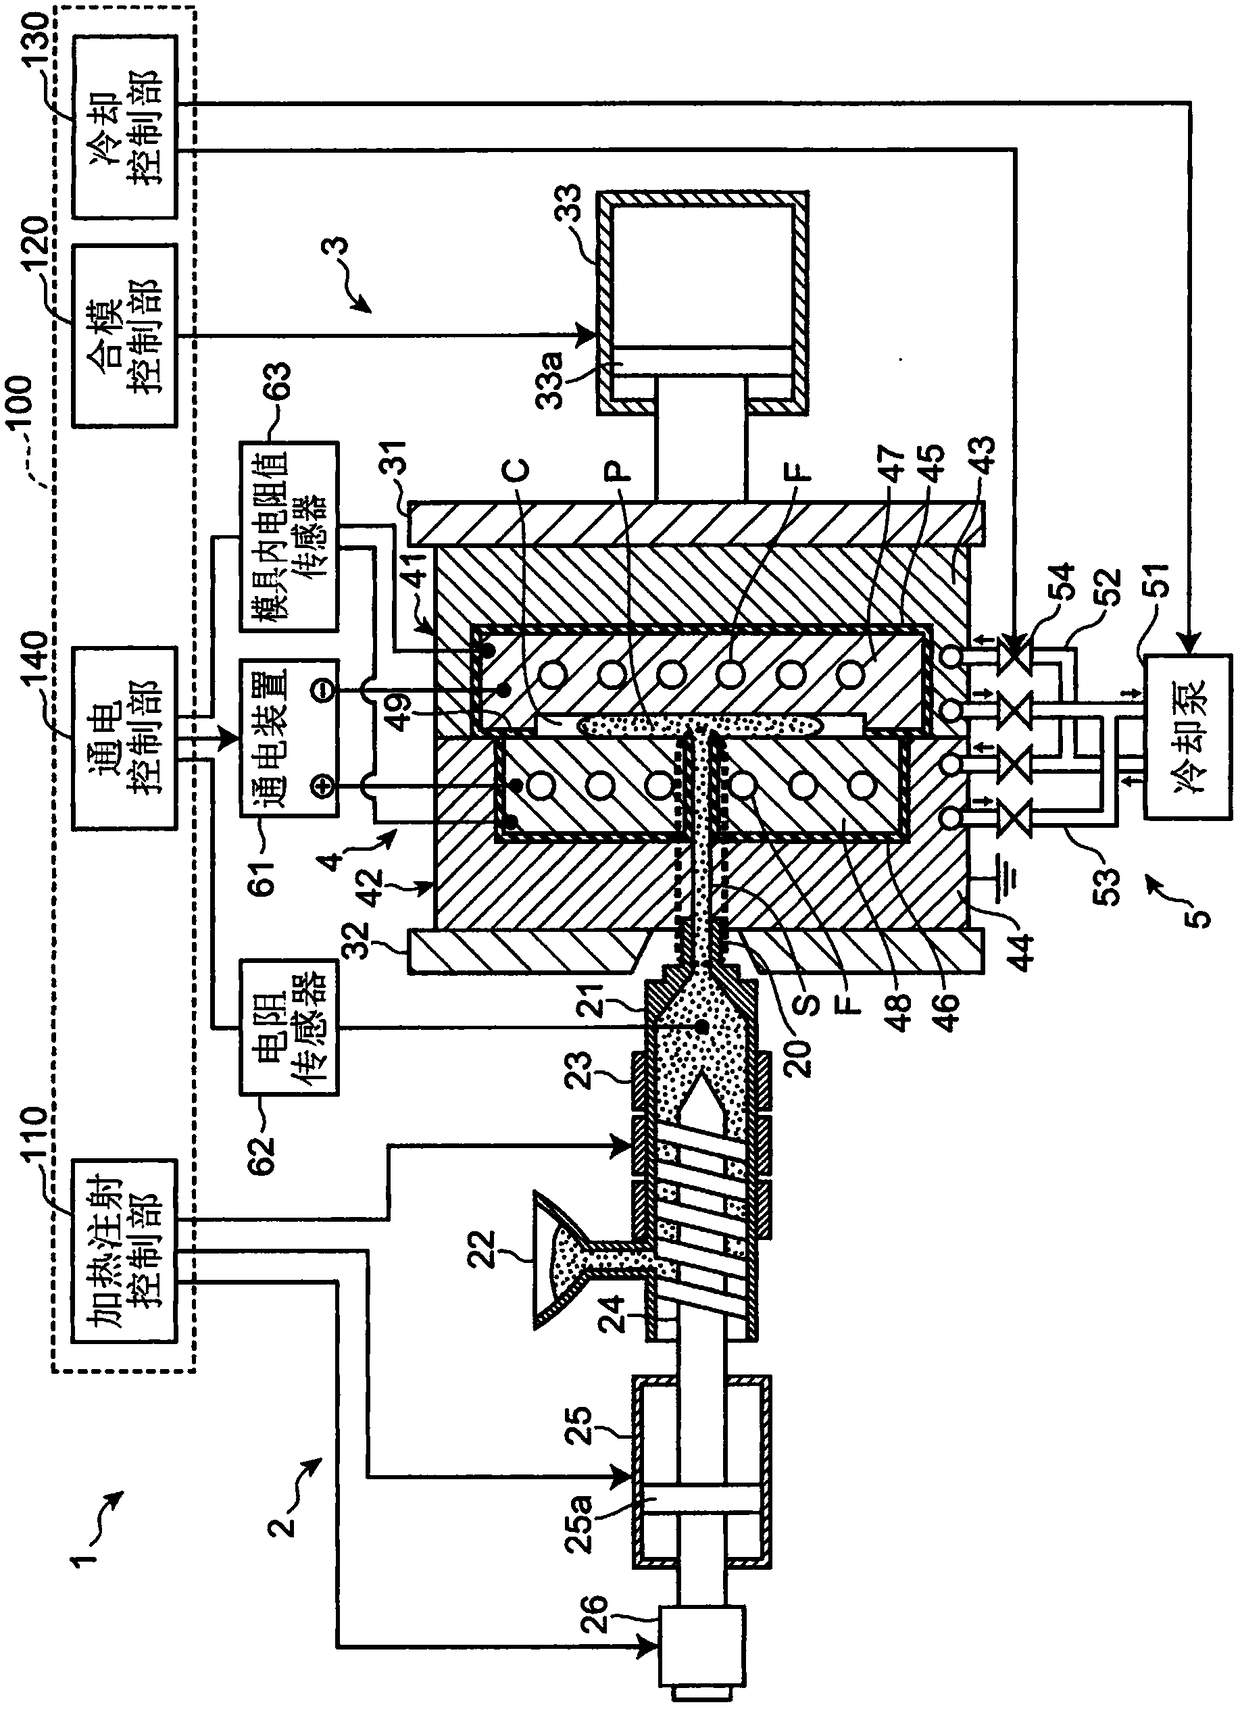 Injection molding apparatus and injection molding method